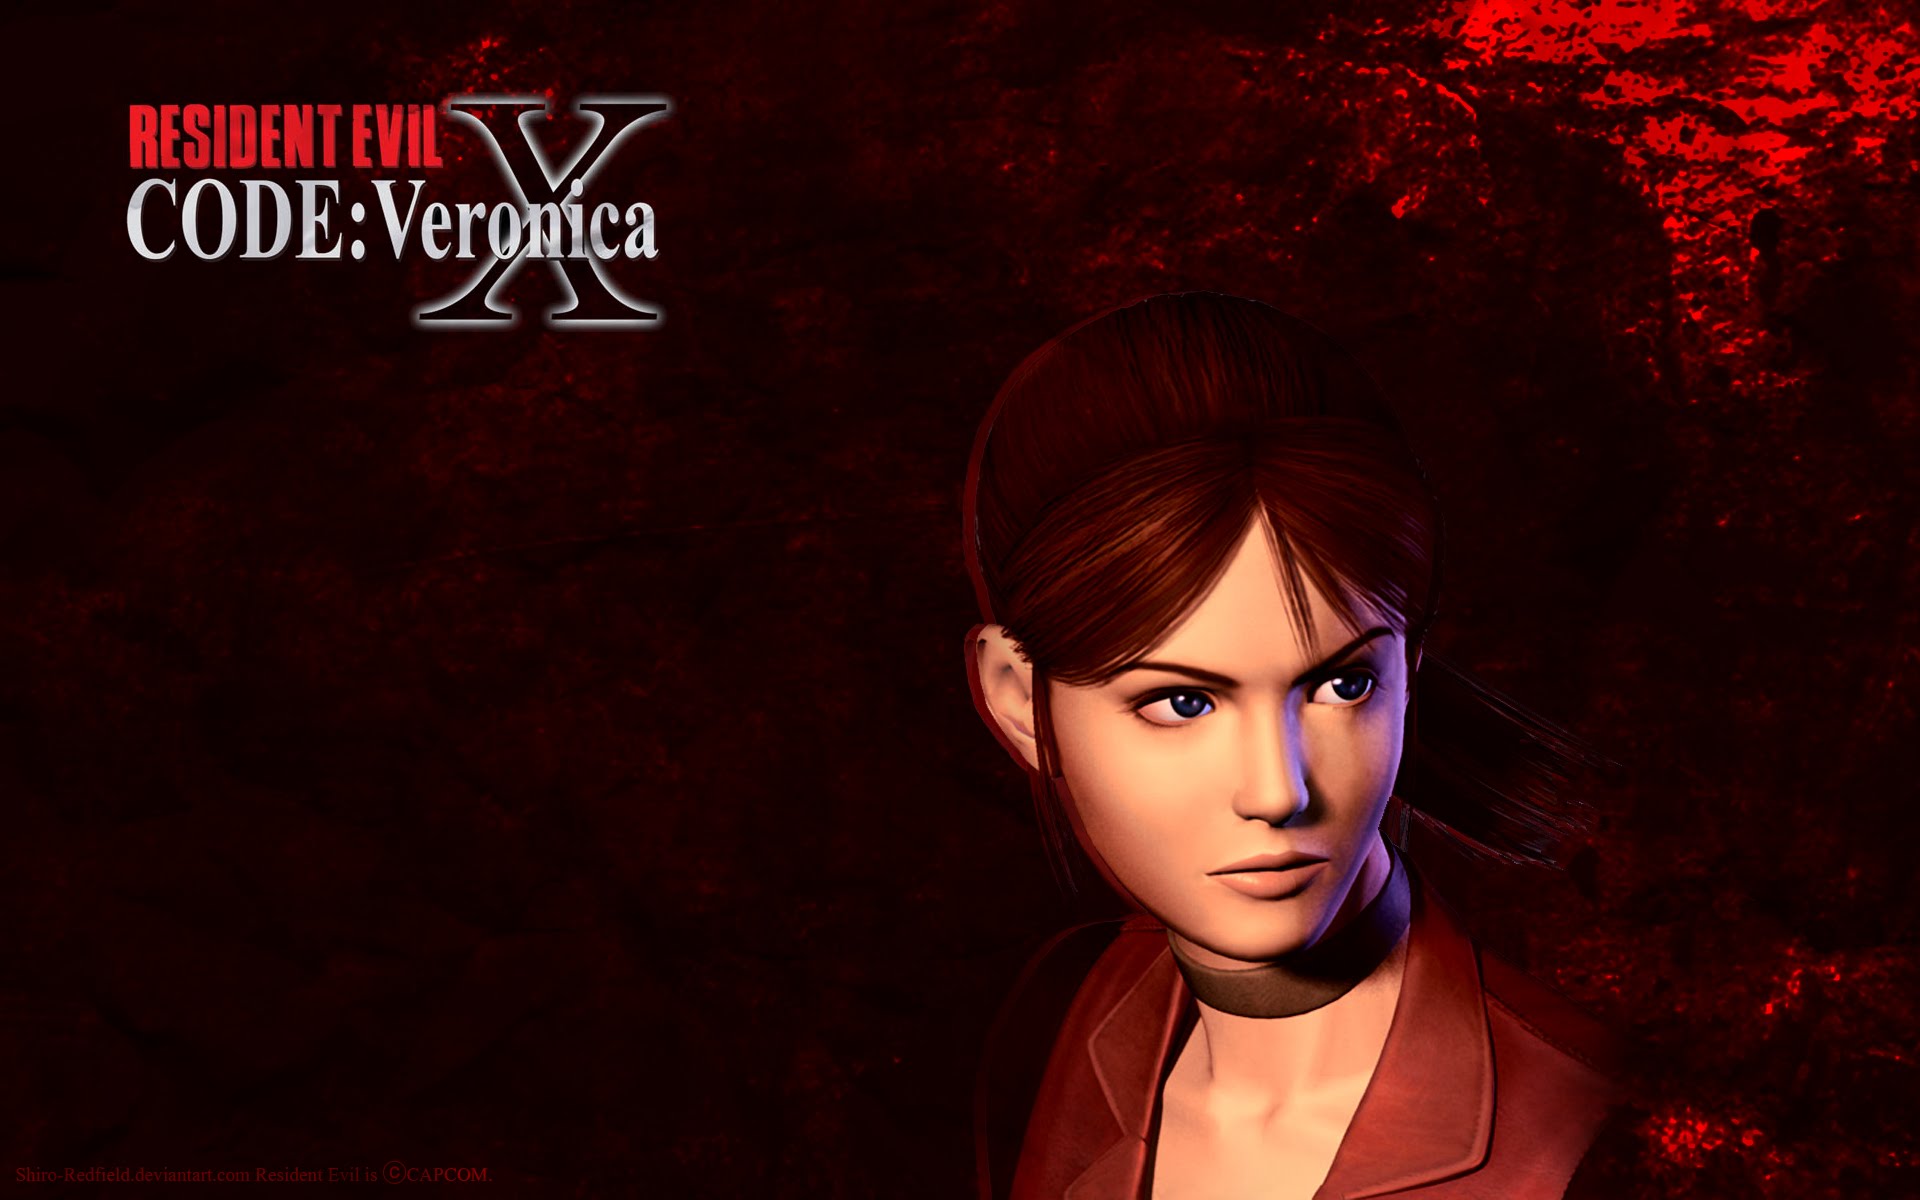 Resident Evil CODE:Veronica X: Official Strategy Guide